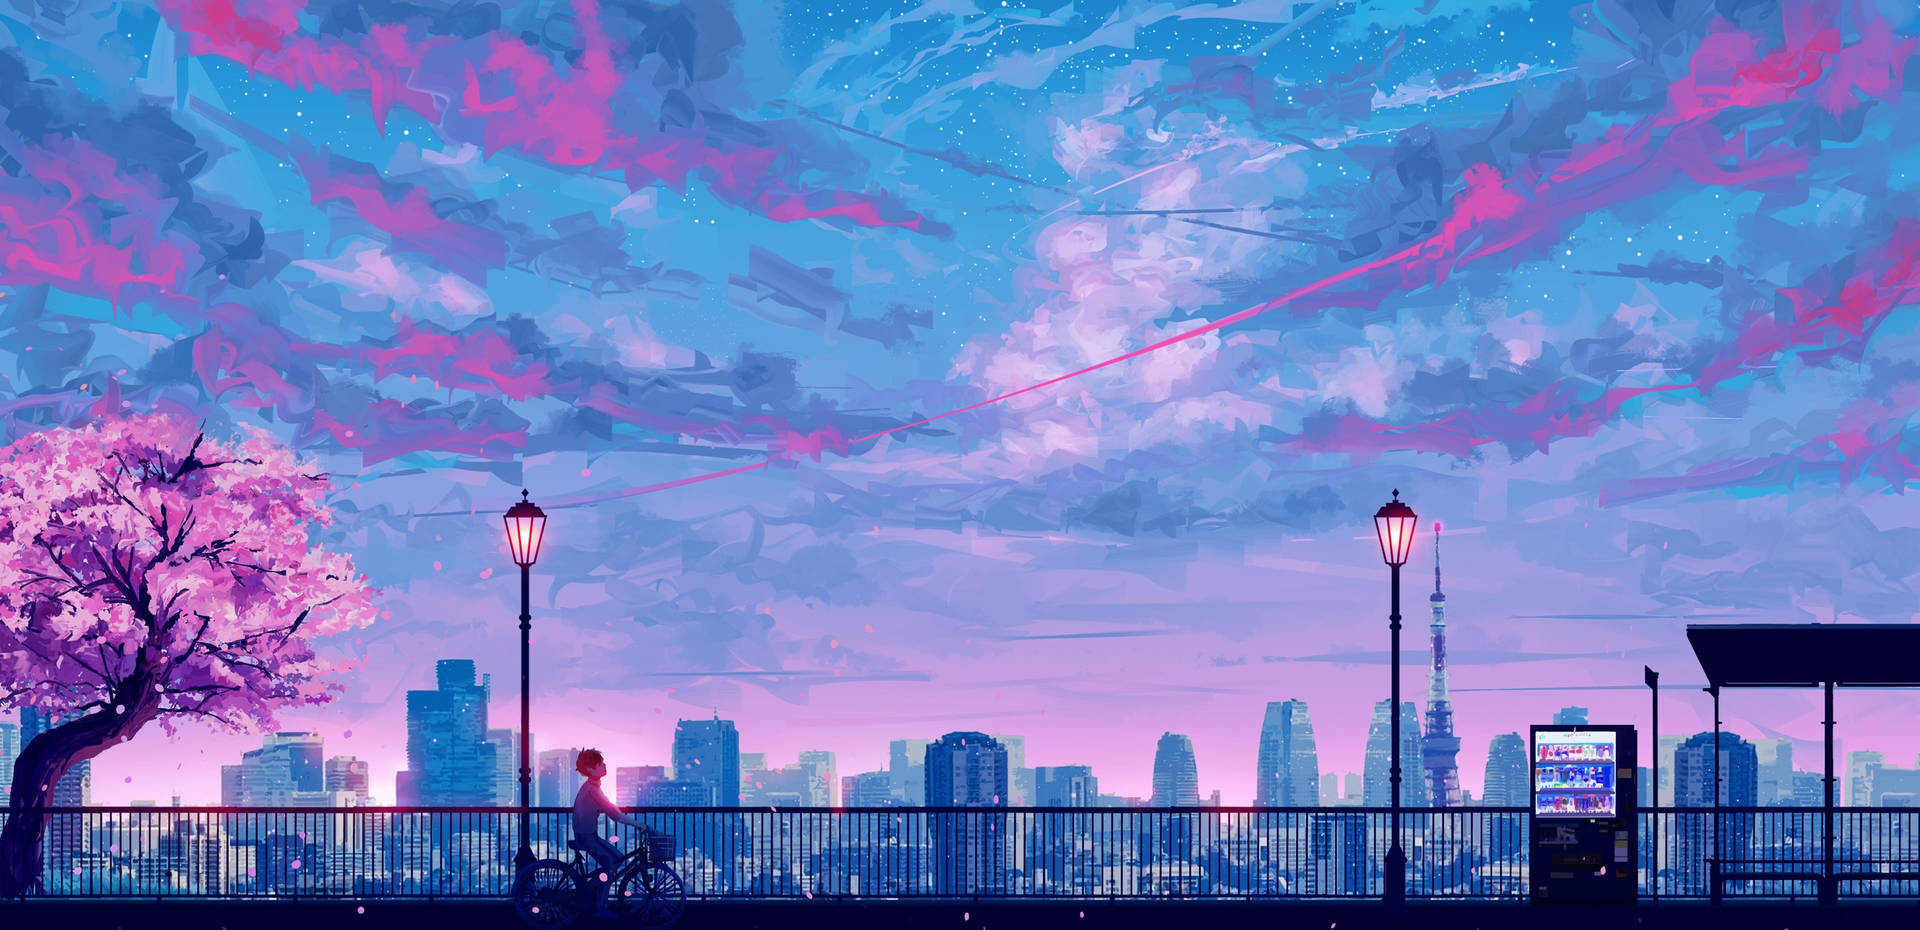 Free Anime Scenery Wallpaper Downloads, [500+] Anime Scenery Wallpapers for  FREE 